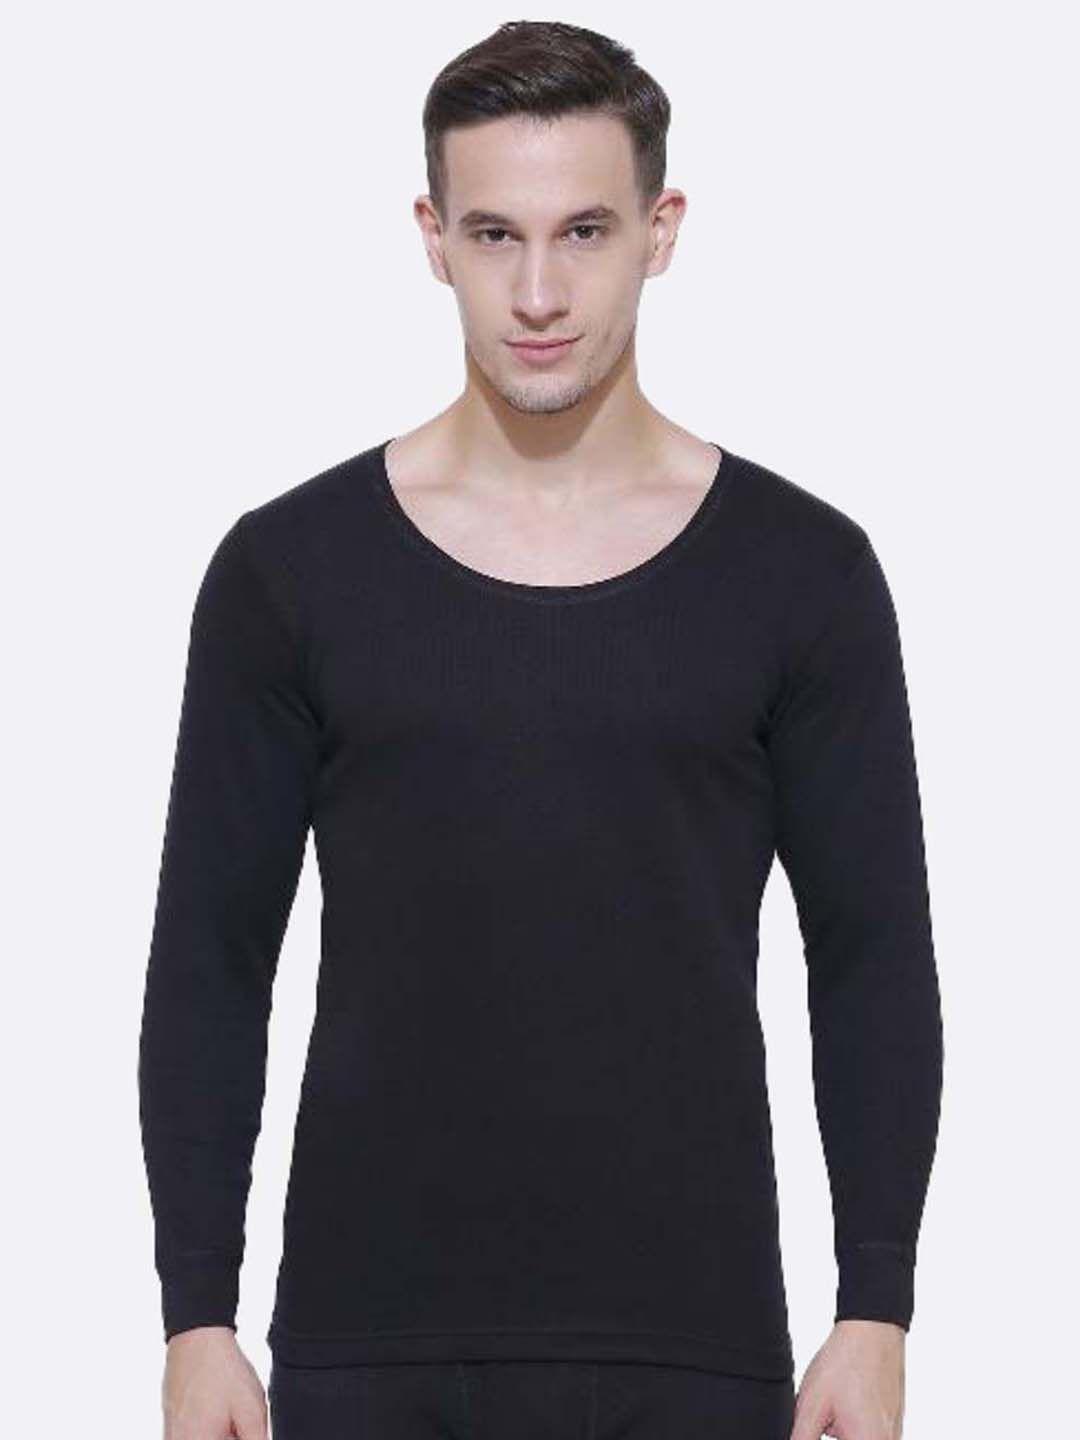 bodycare-insider-men-striped-cotton-anti-bacterial-thermal-tops